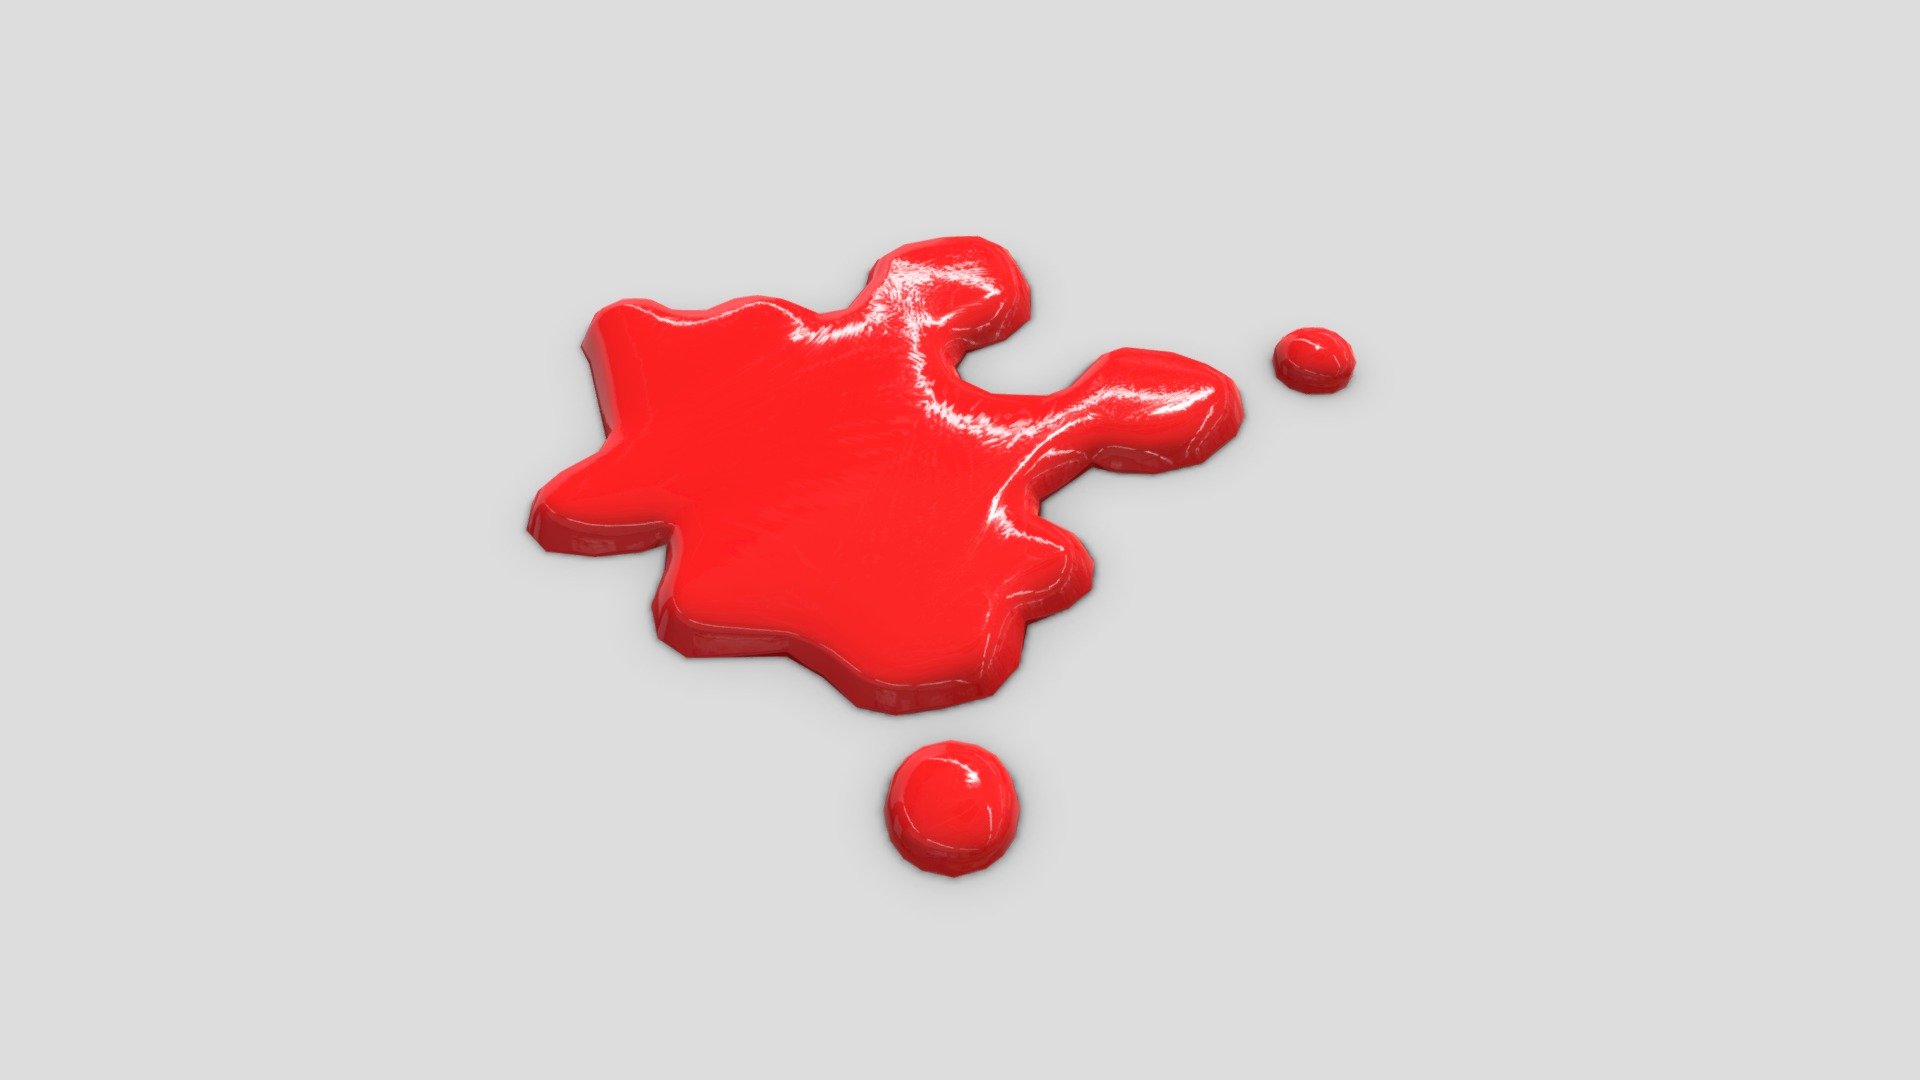 ‘For the big red drop a big red spot!’

● 2048 x 2048 PBR textures

● normal map is baked from the high poly model

If you need help with this model or have a question – please do not hesitate to contact with me. I will be happy to help you.

Contact: plaggy.net@gmail.com

Formats: .fbx, .dae, .max, .obj, .mtl, .png, .glTF, .USDZ Polygon: 304 Vertices: 318 Textures: Yes, PBR (ao, albedo, metal, normal, ORM, rough) Materials: Yes UV Mapped: Yes Unwrapped UVs: Yes (non overlapping) - Color Spot 4 - Buy Royalty Free 3D model by plaggy 3d model